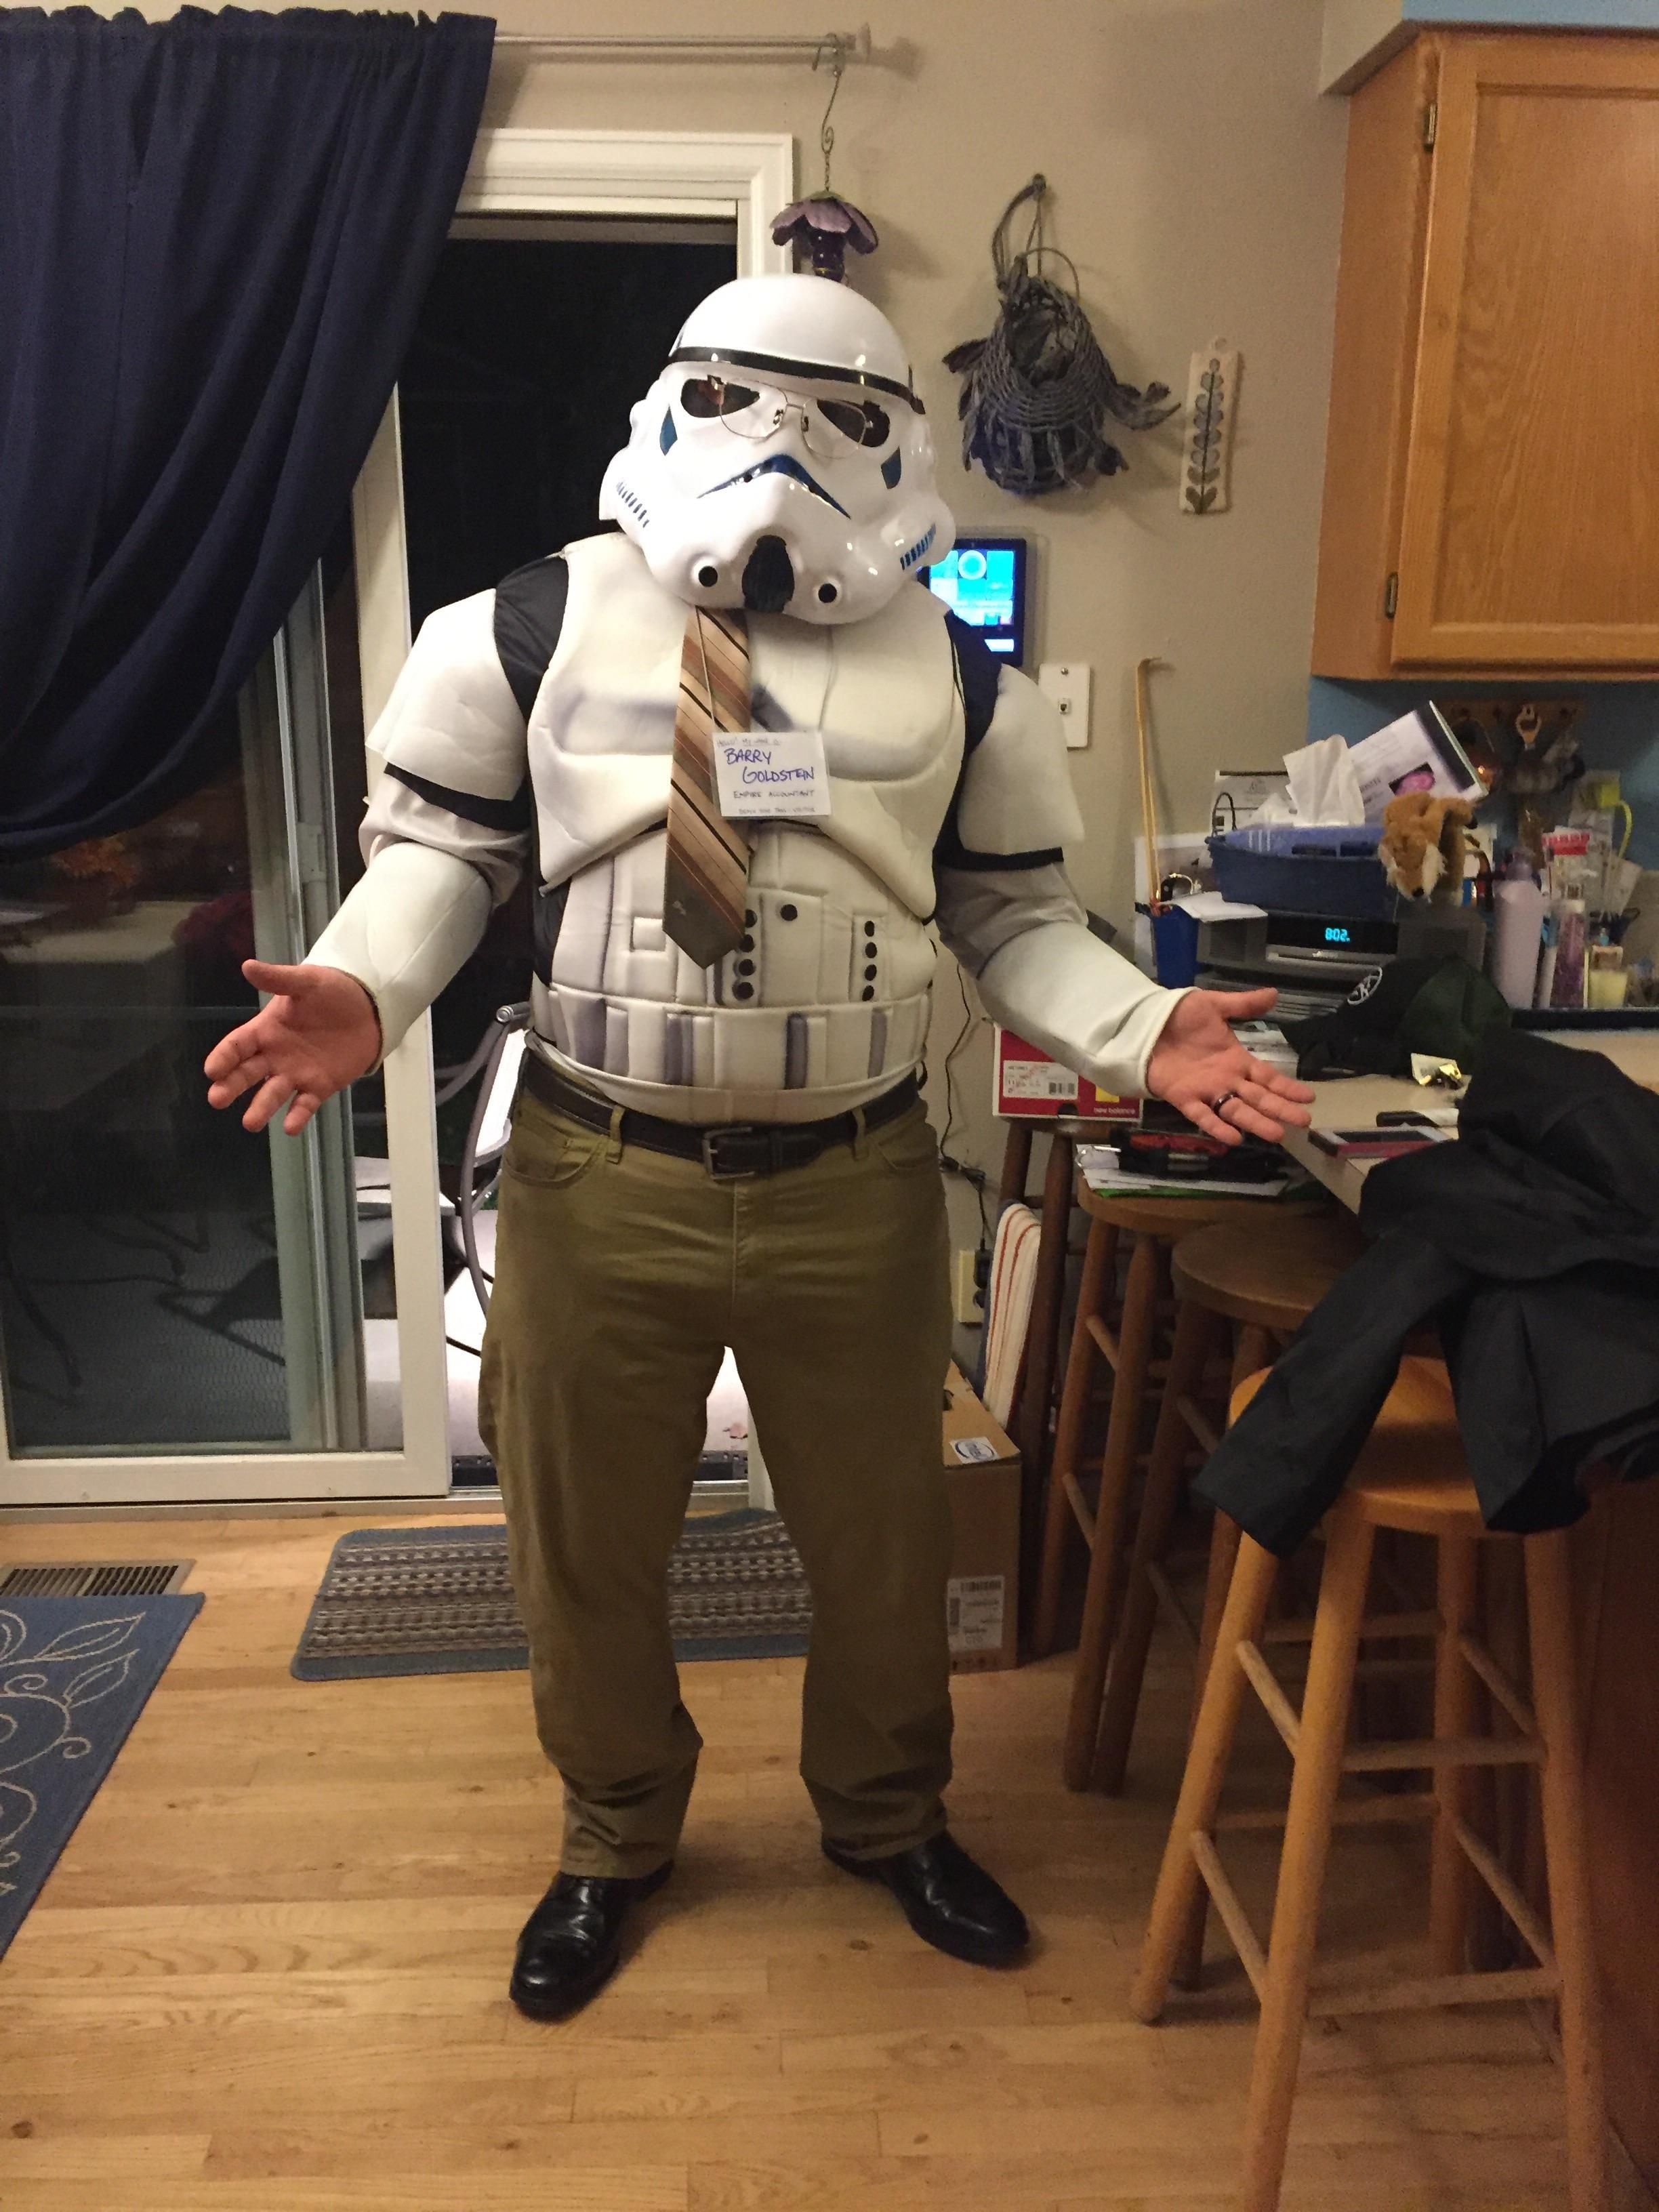 Saw a star wars post about the Empire needing an HR department reminded me of when I went for Halloween as an accountant for the Death Star.